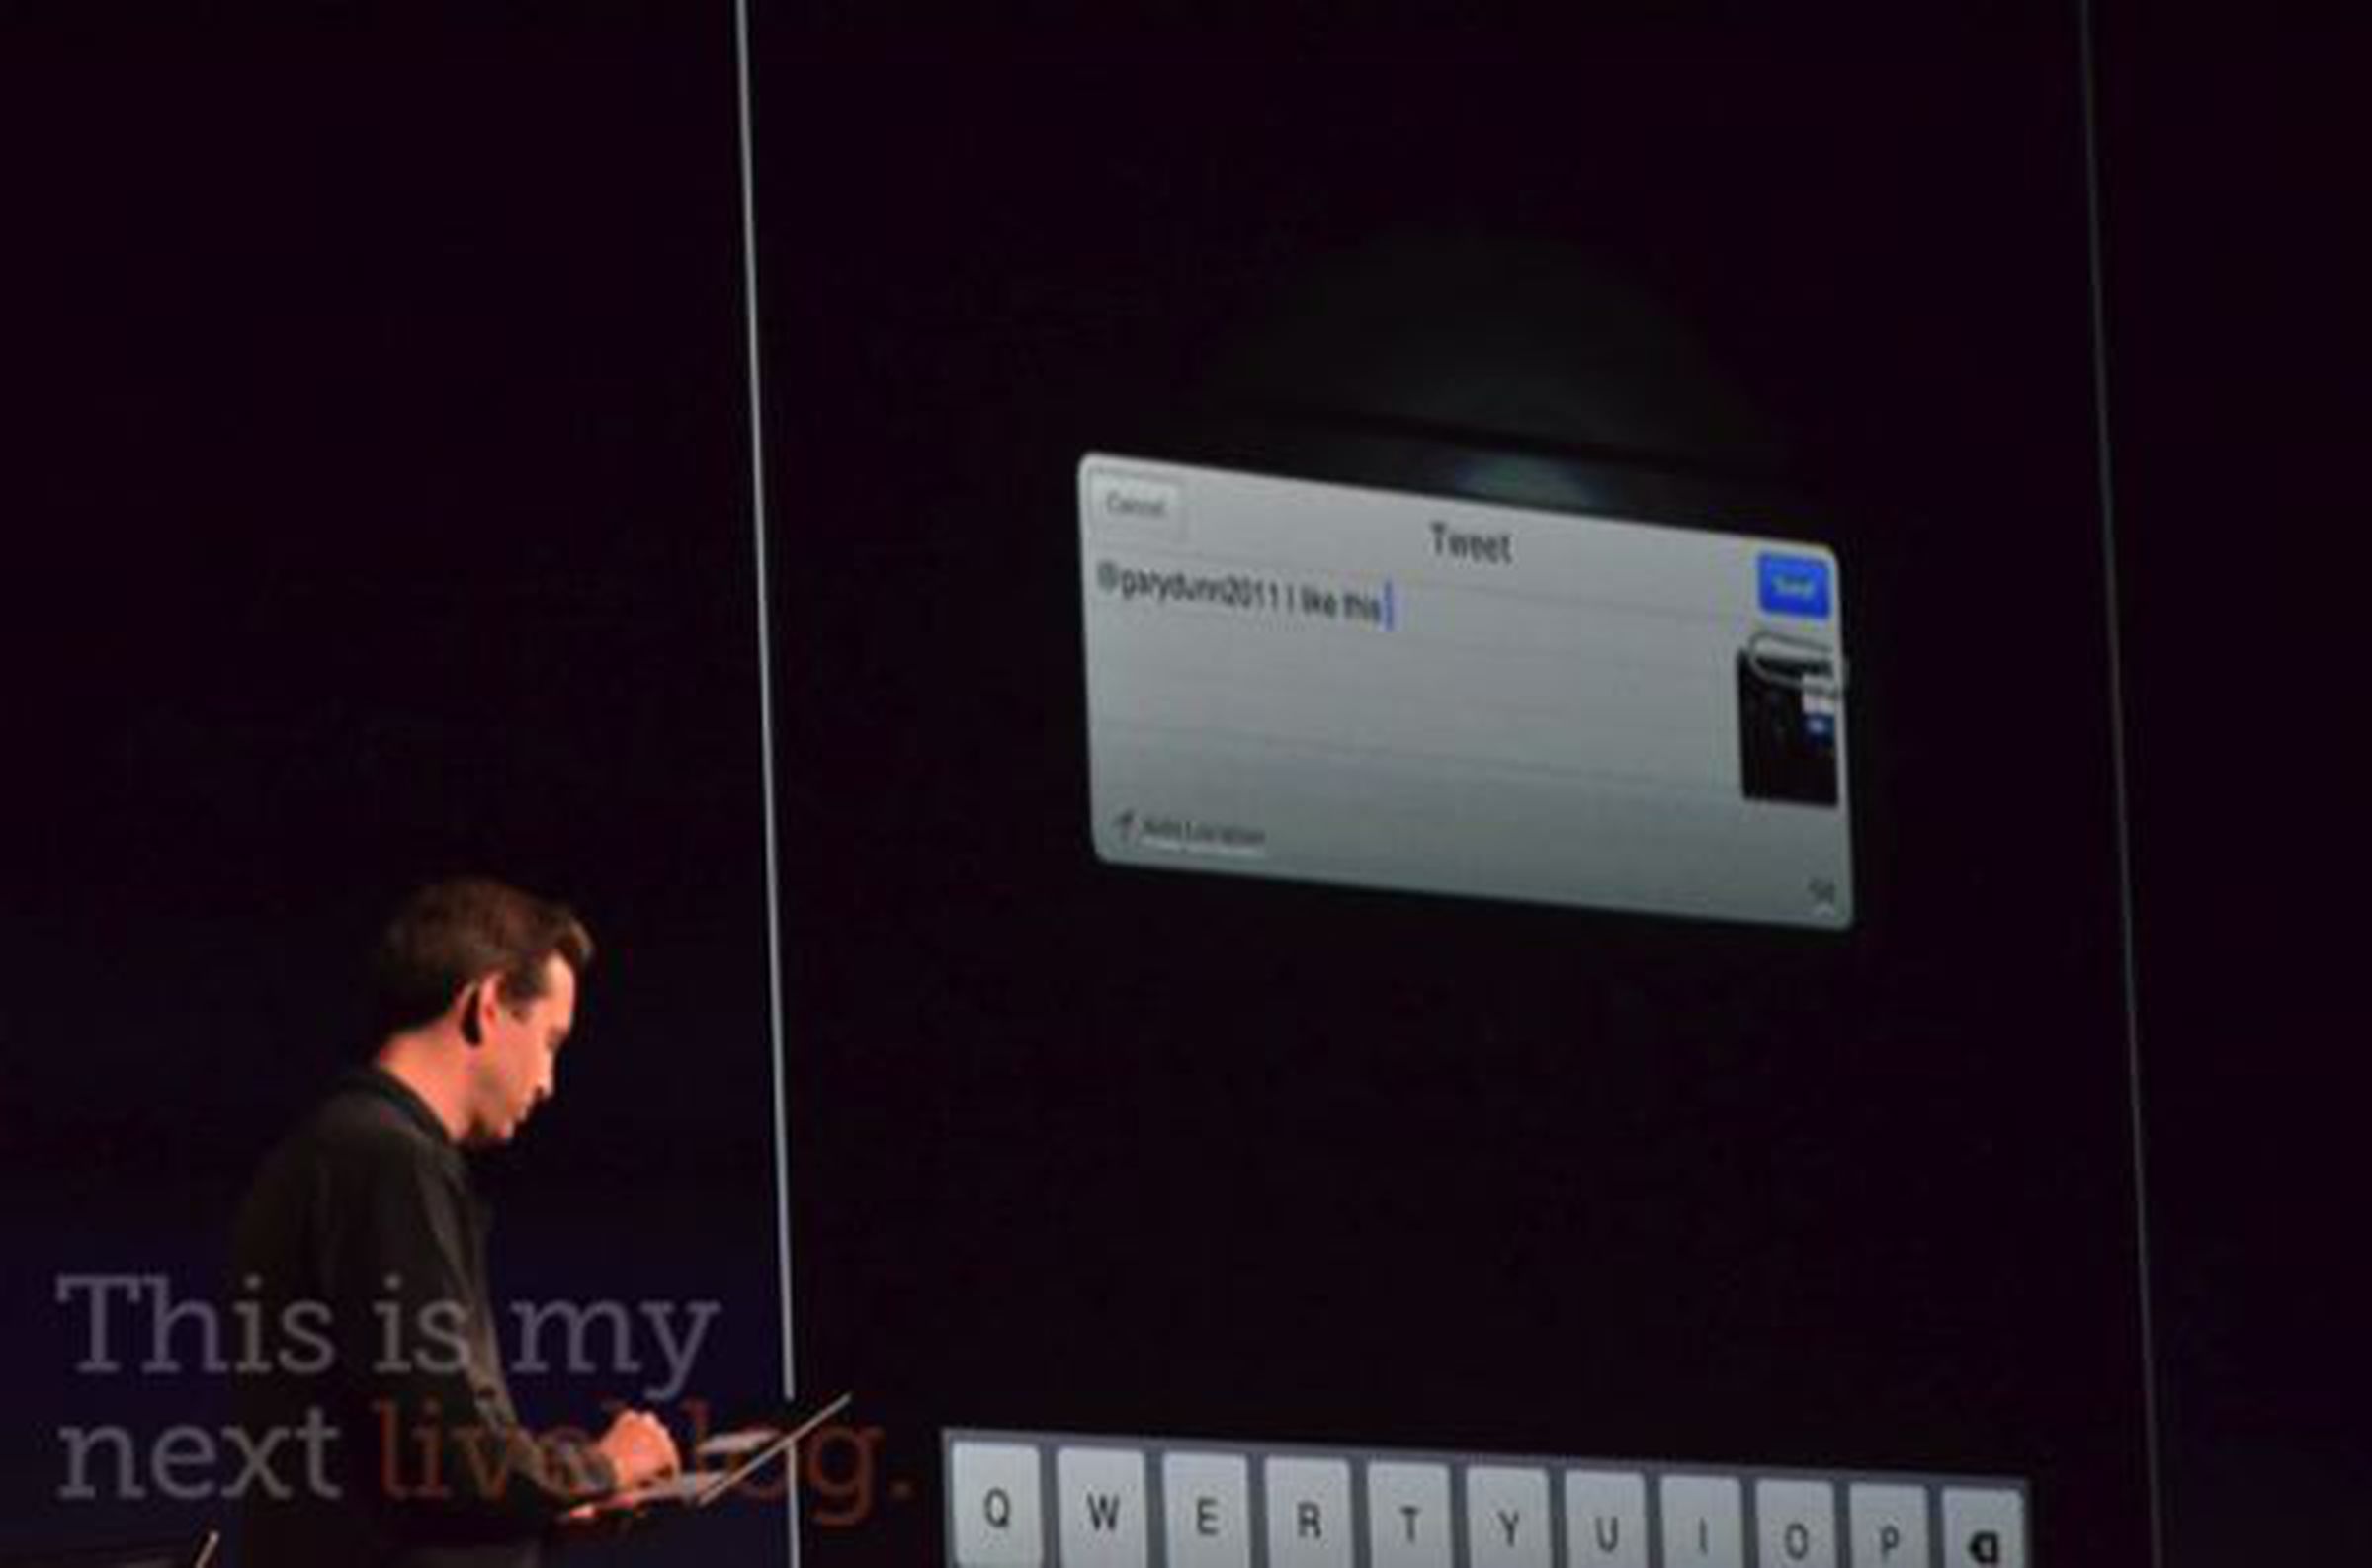 iOS 5 announced: iMessage, Notification Center, and more; comes today for devs, this fall for everyone else